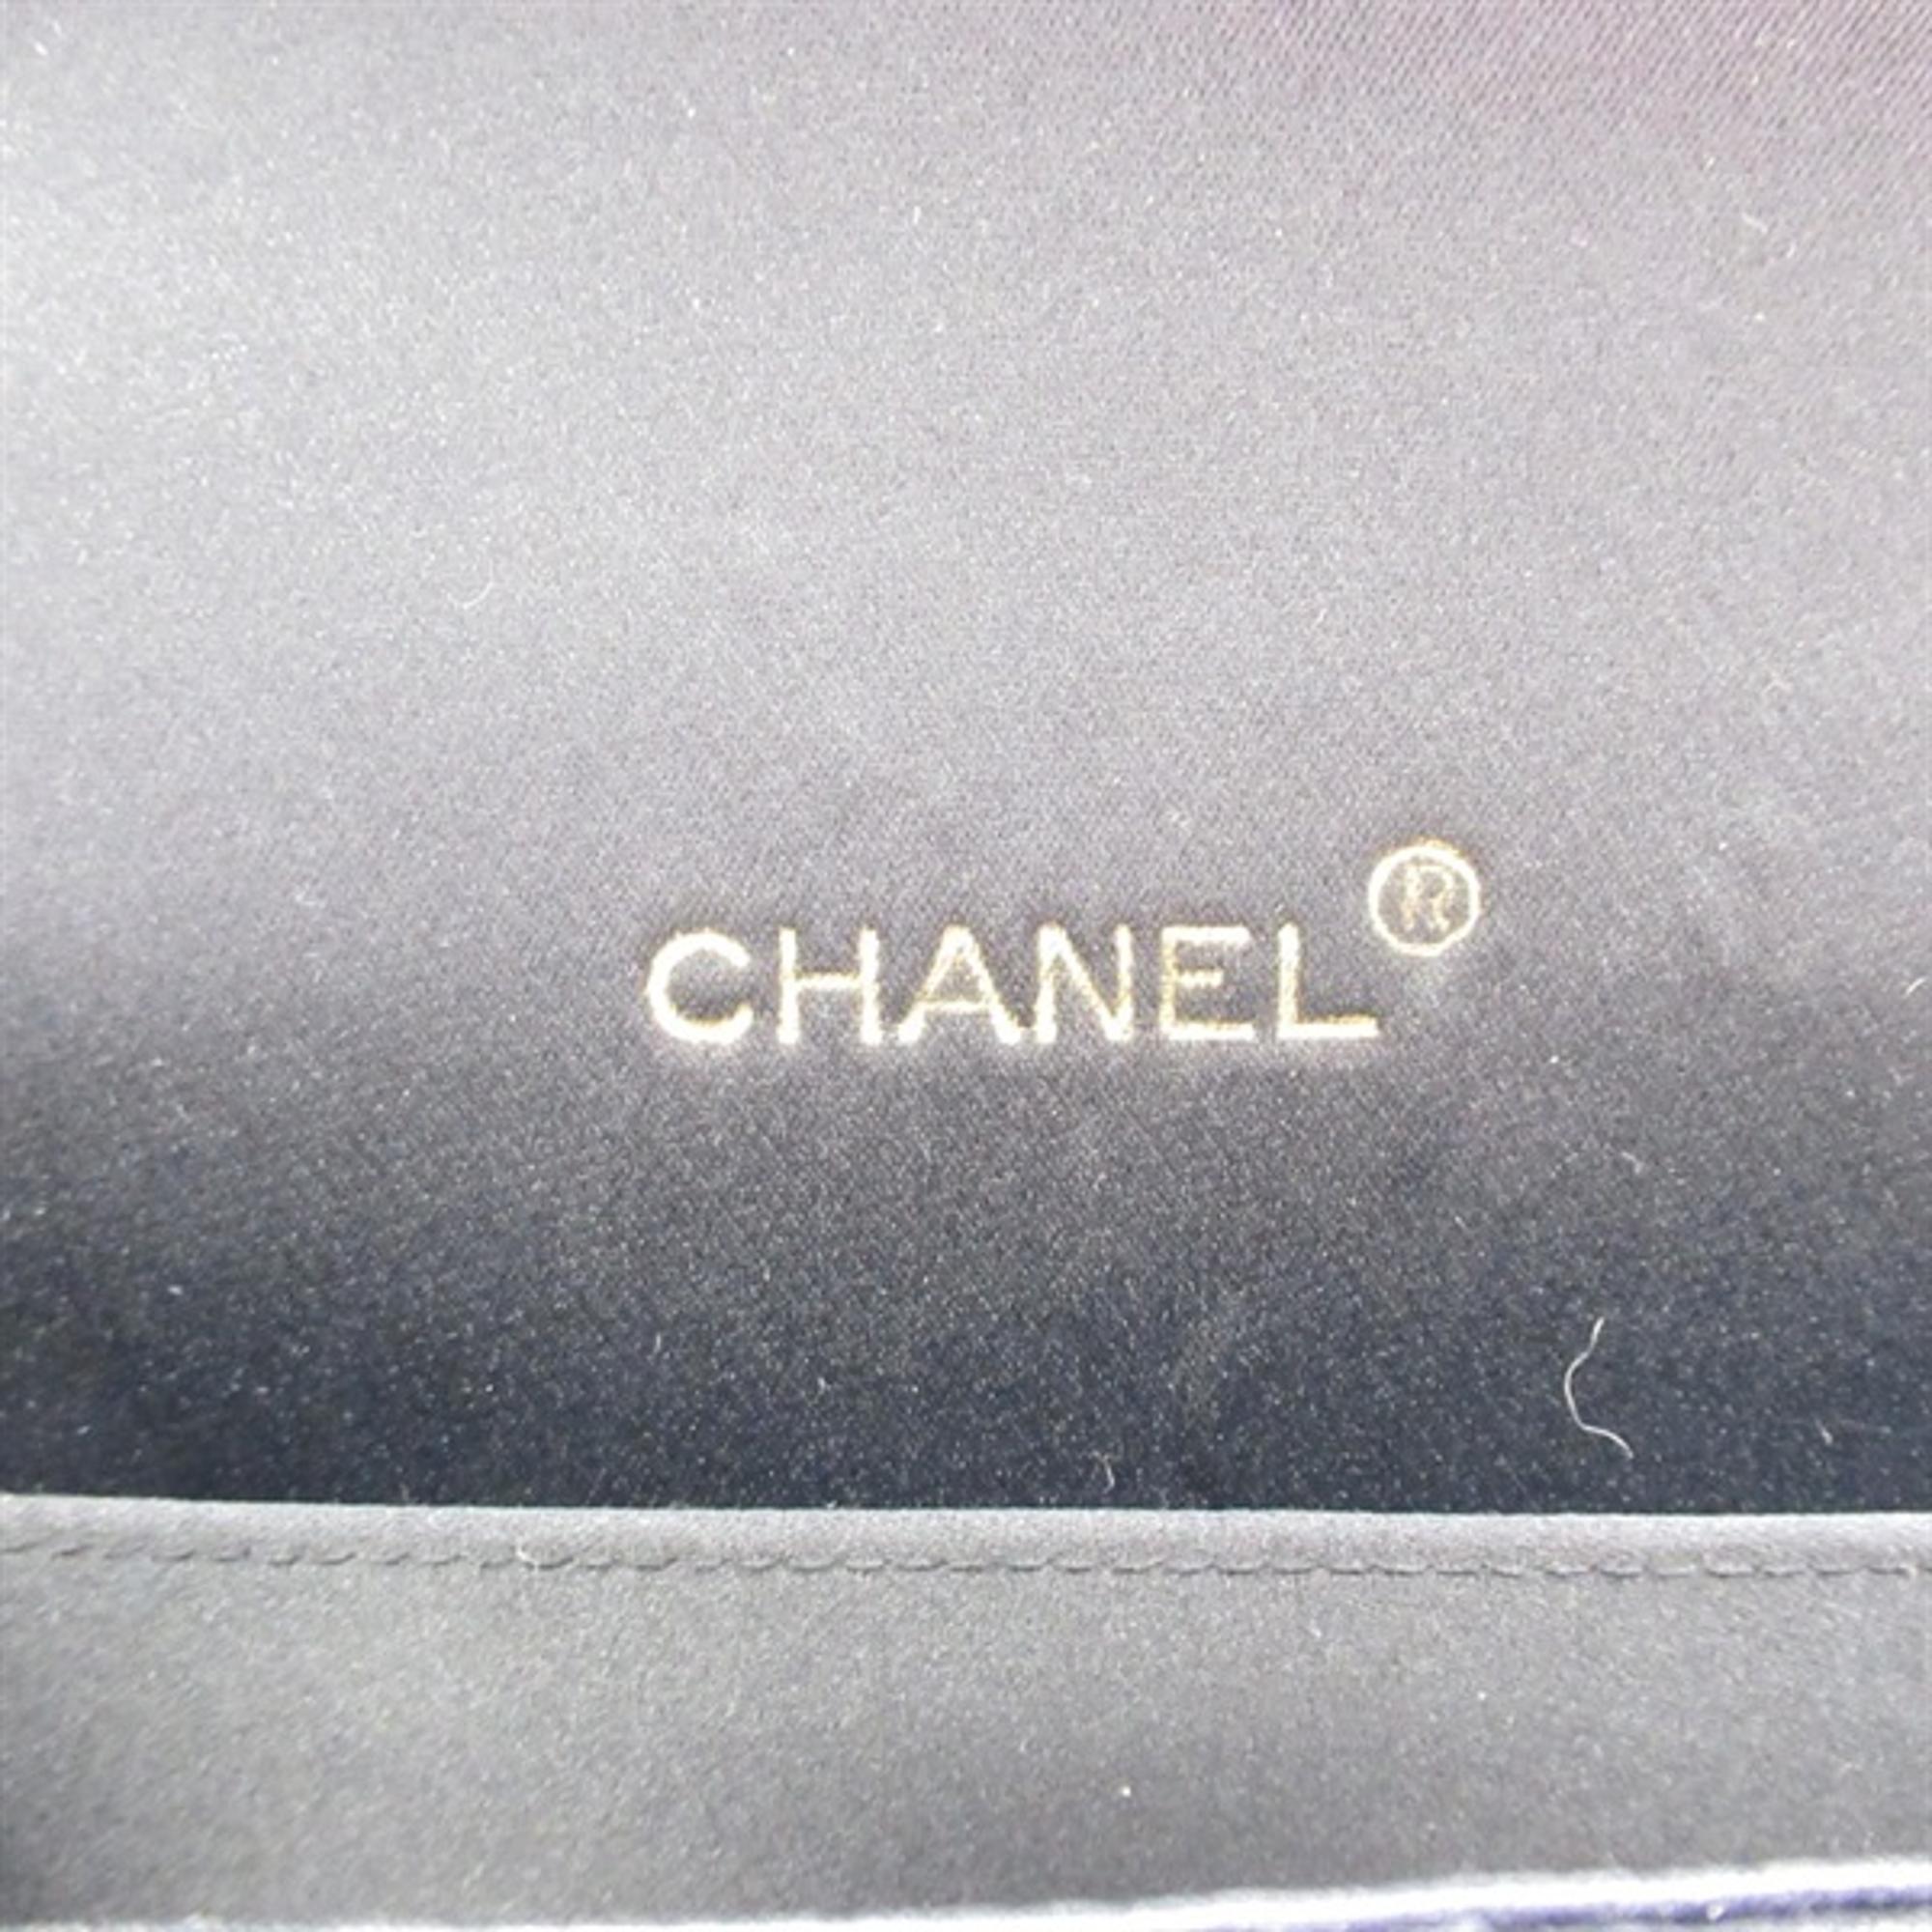 Chanel Black Canvas Quilted Satin Camellia Flap Bag